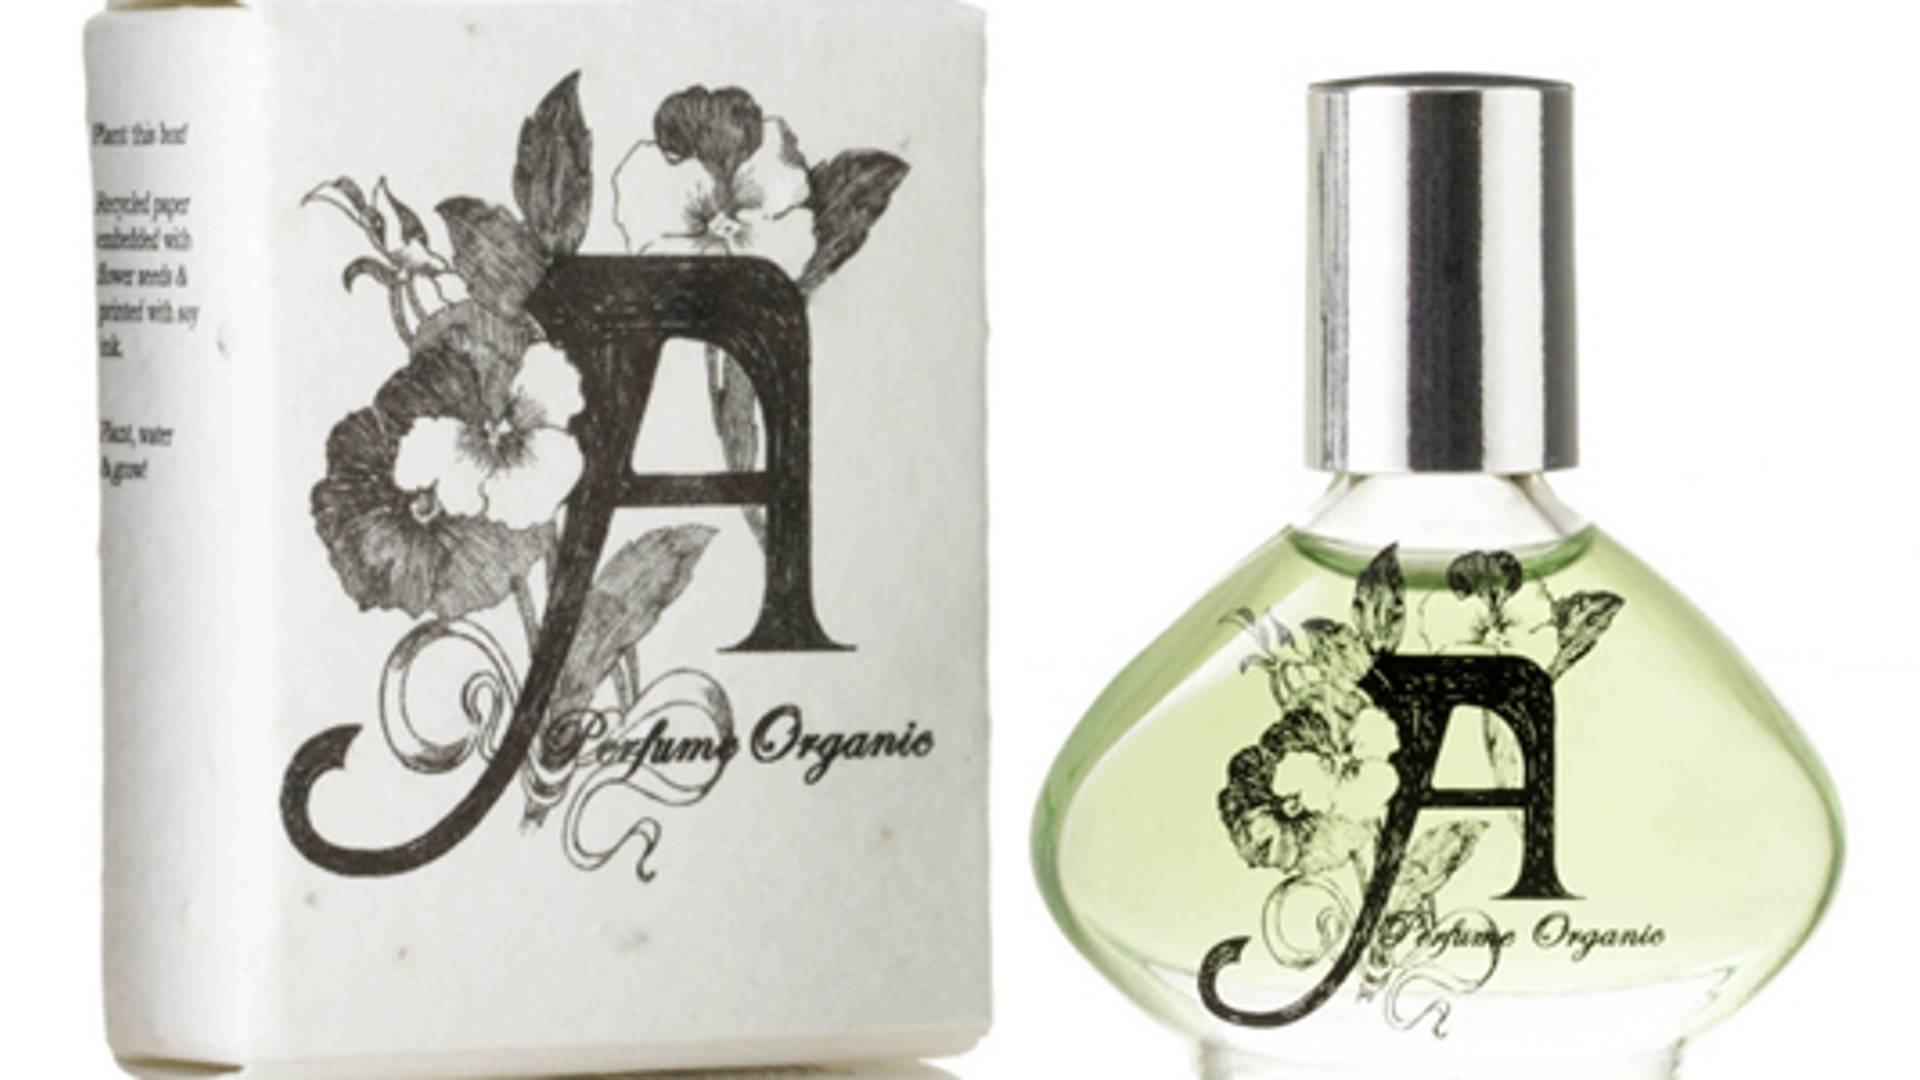 Featured image for A Perfume Organic